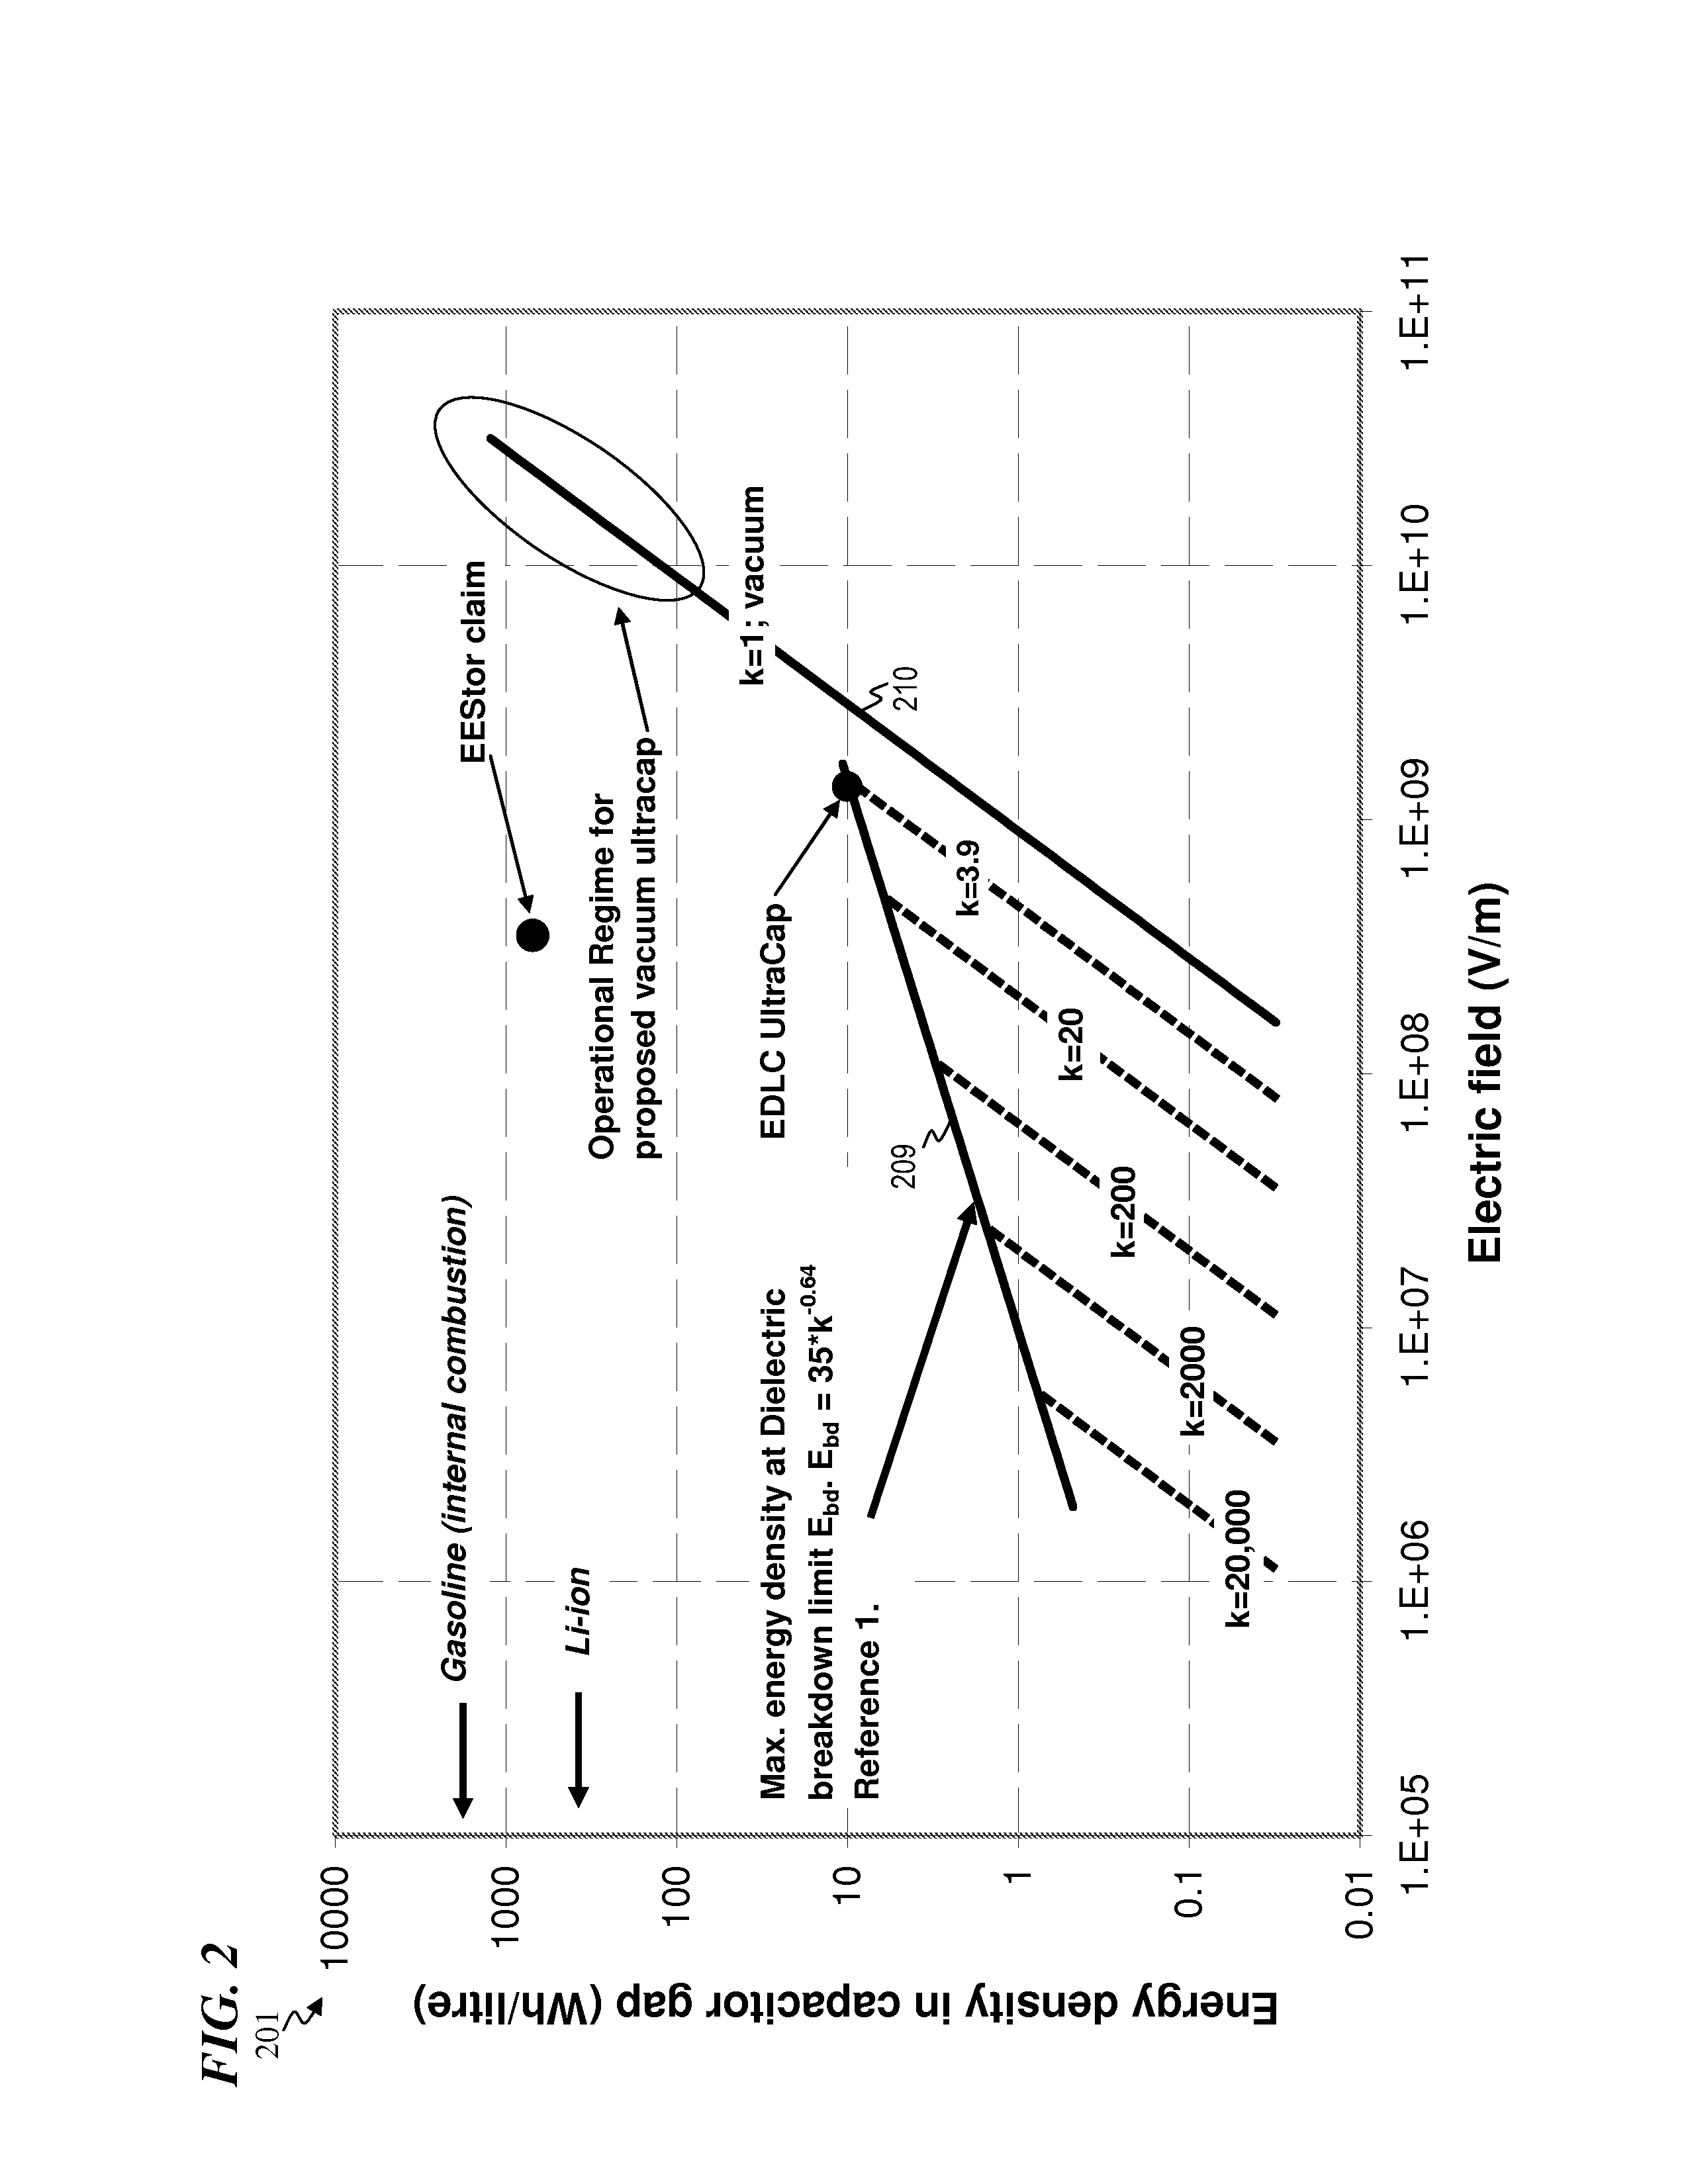 Apparatus and method for capacitors having engineered electrodes with very high energy density